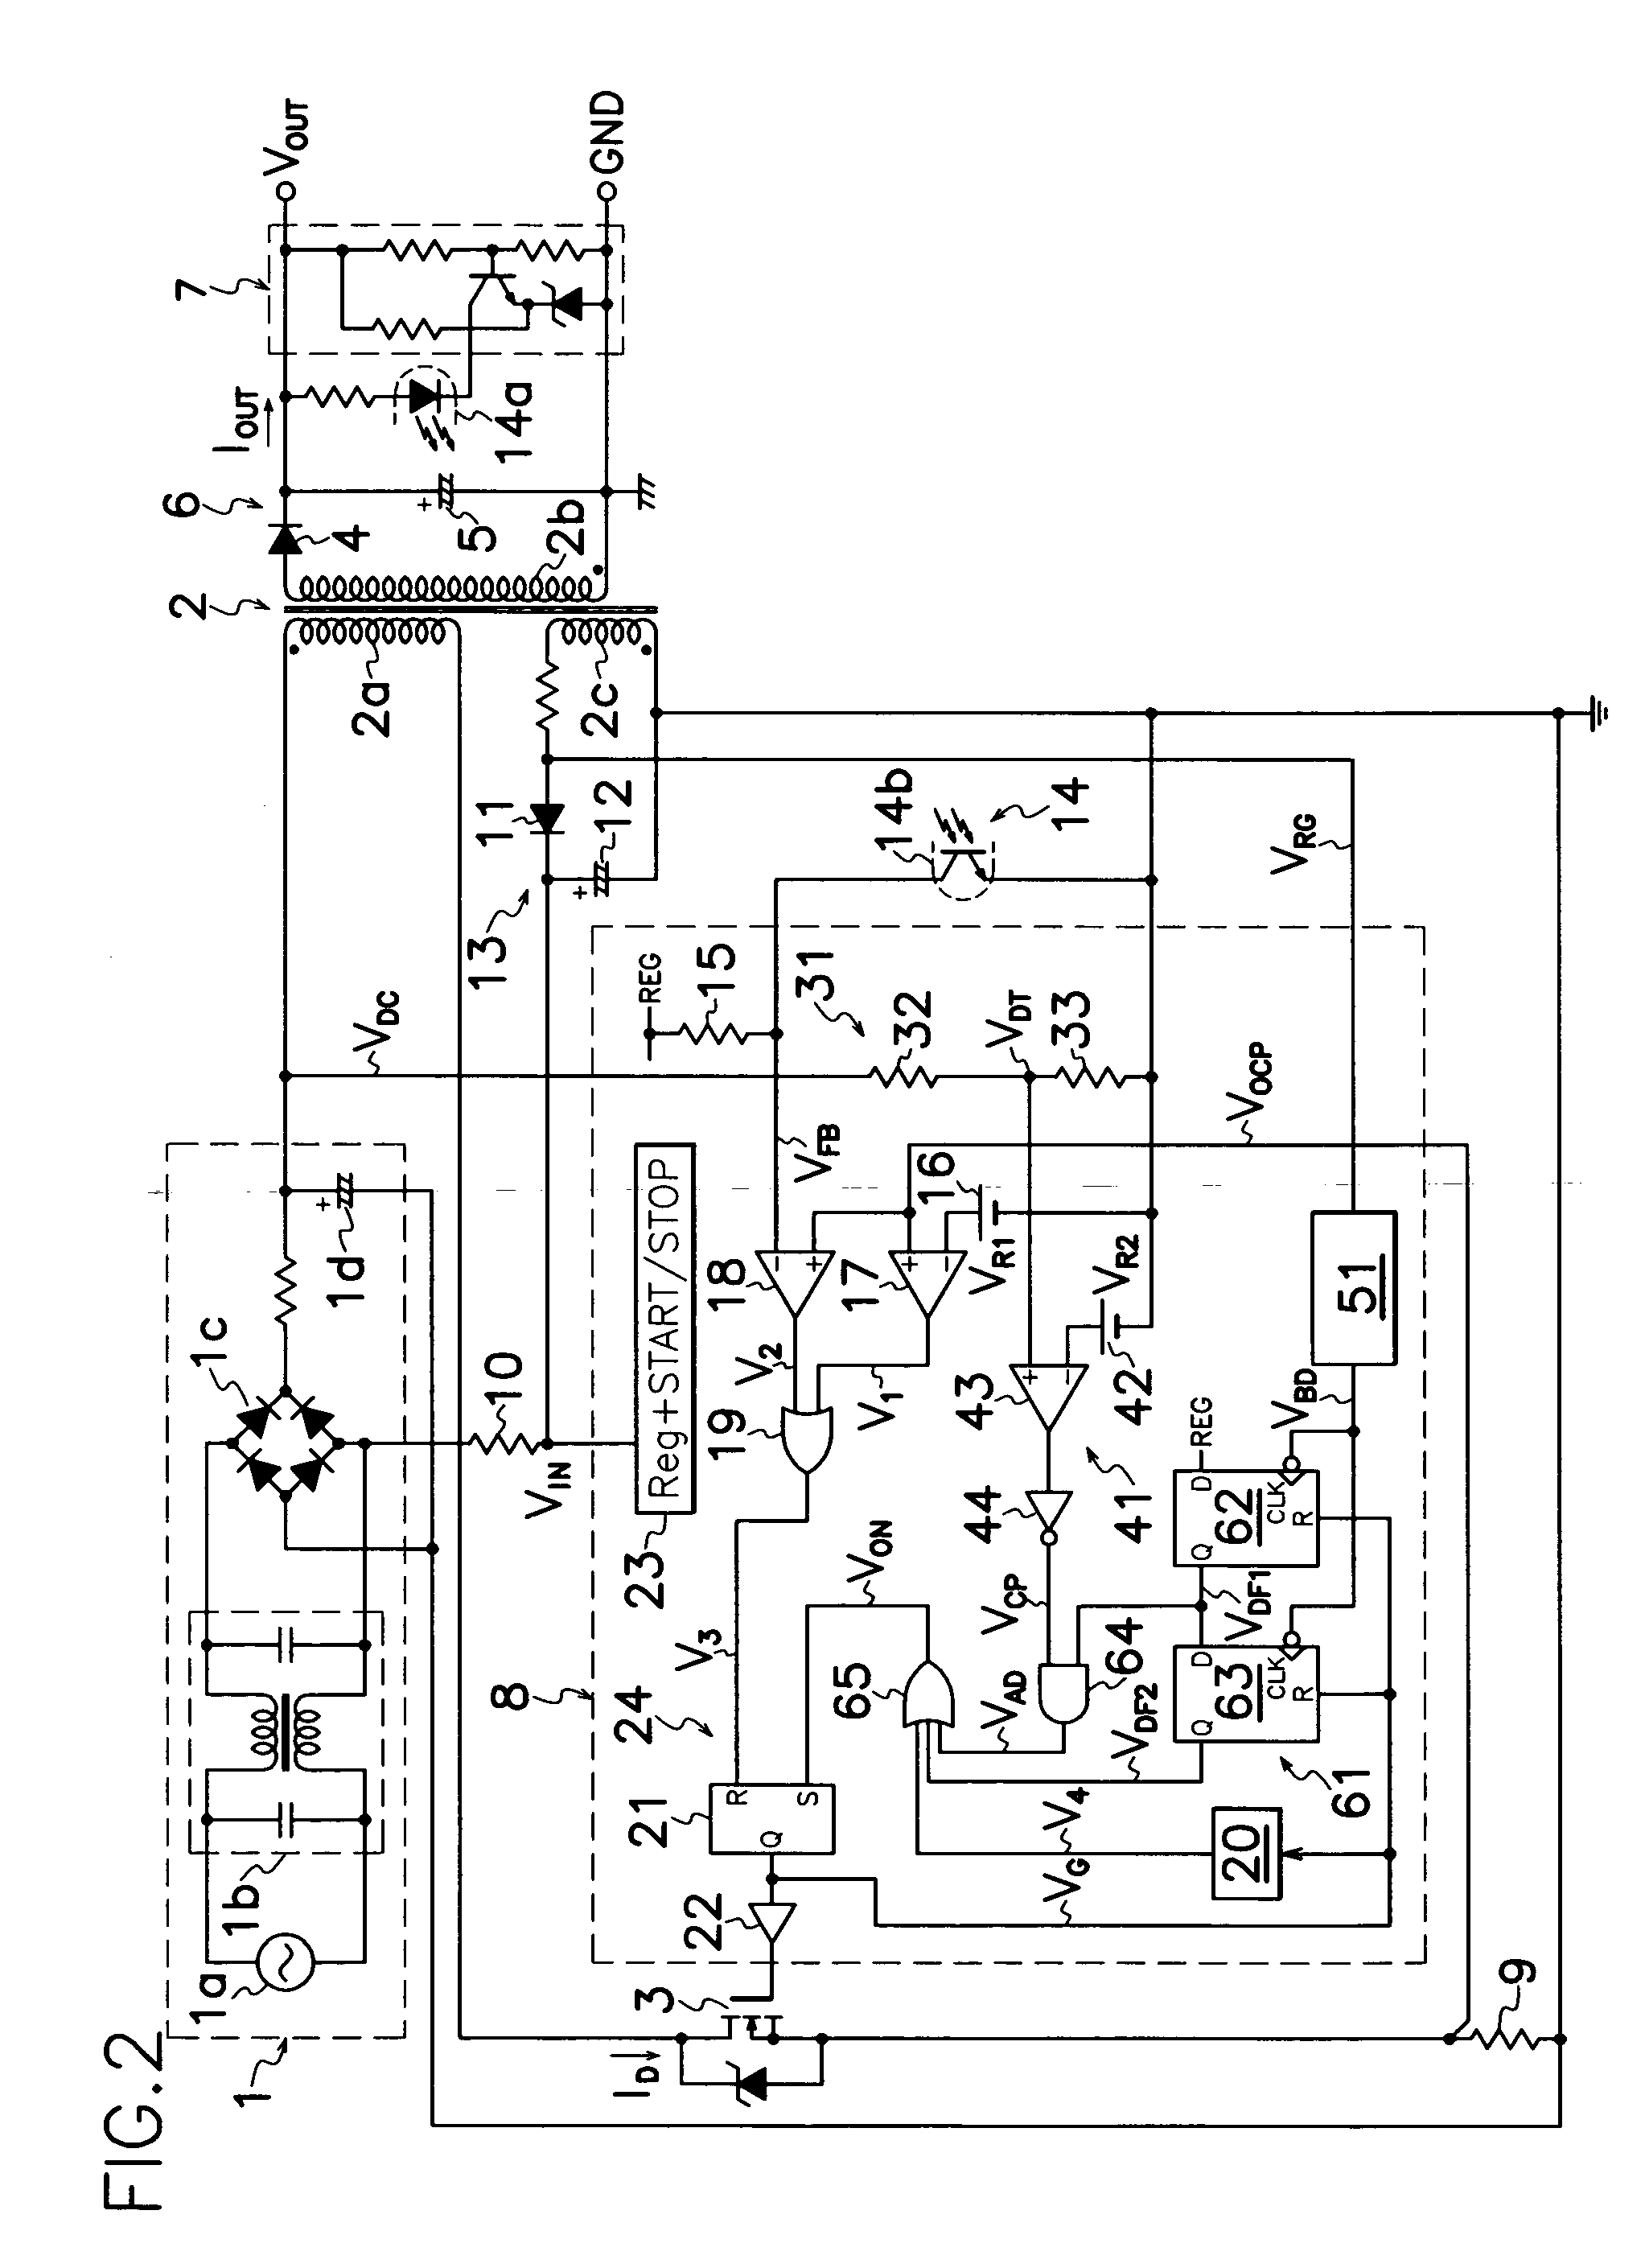 Switching power source